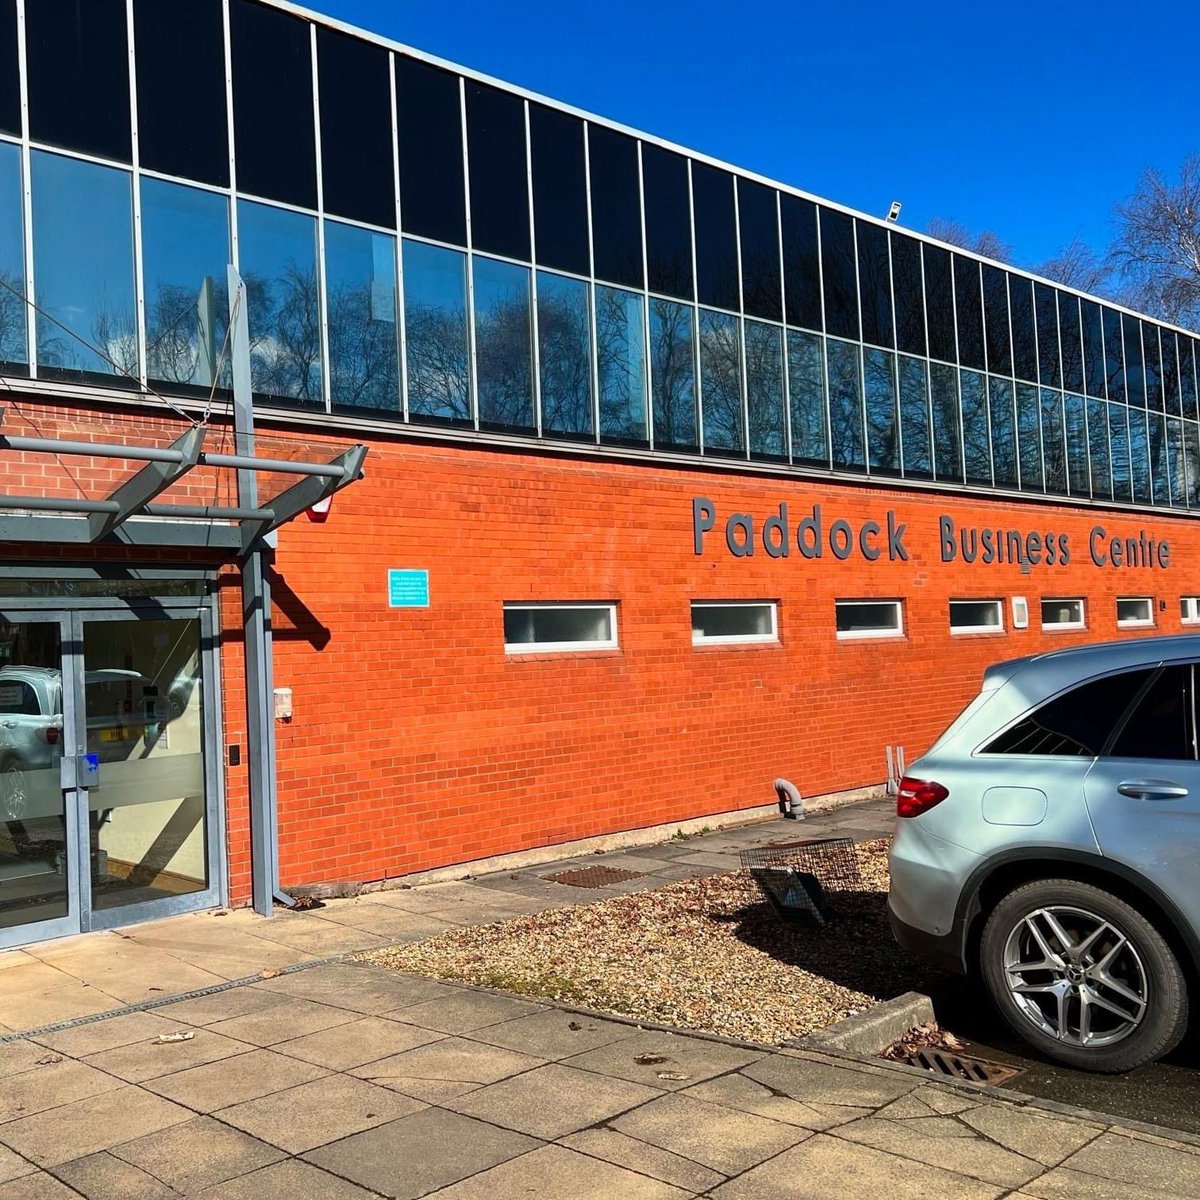 Yesterday we were awarded the contract for the Daily Office Cleaning of the Paddock Business Centre in Skelmersdale! 🥳

 #njcleaning #cleaningservices #leigh #cleanerliving #wiganjobs #feedbackmatters #officeclean #smilesformiles